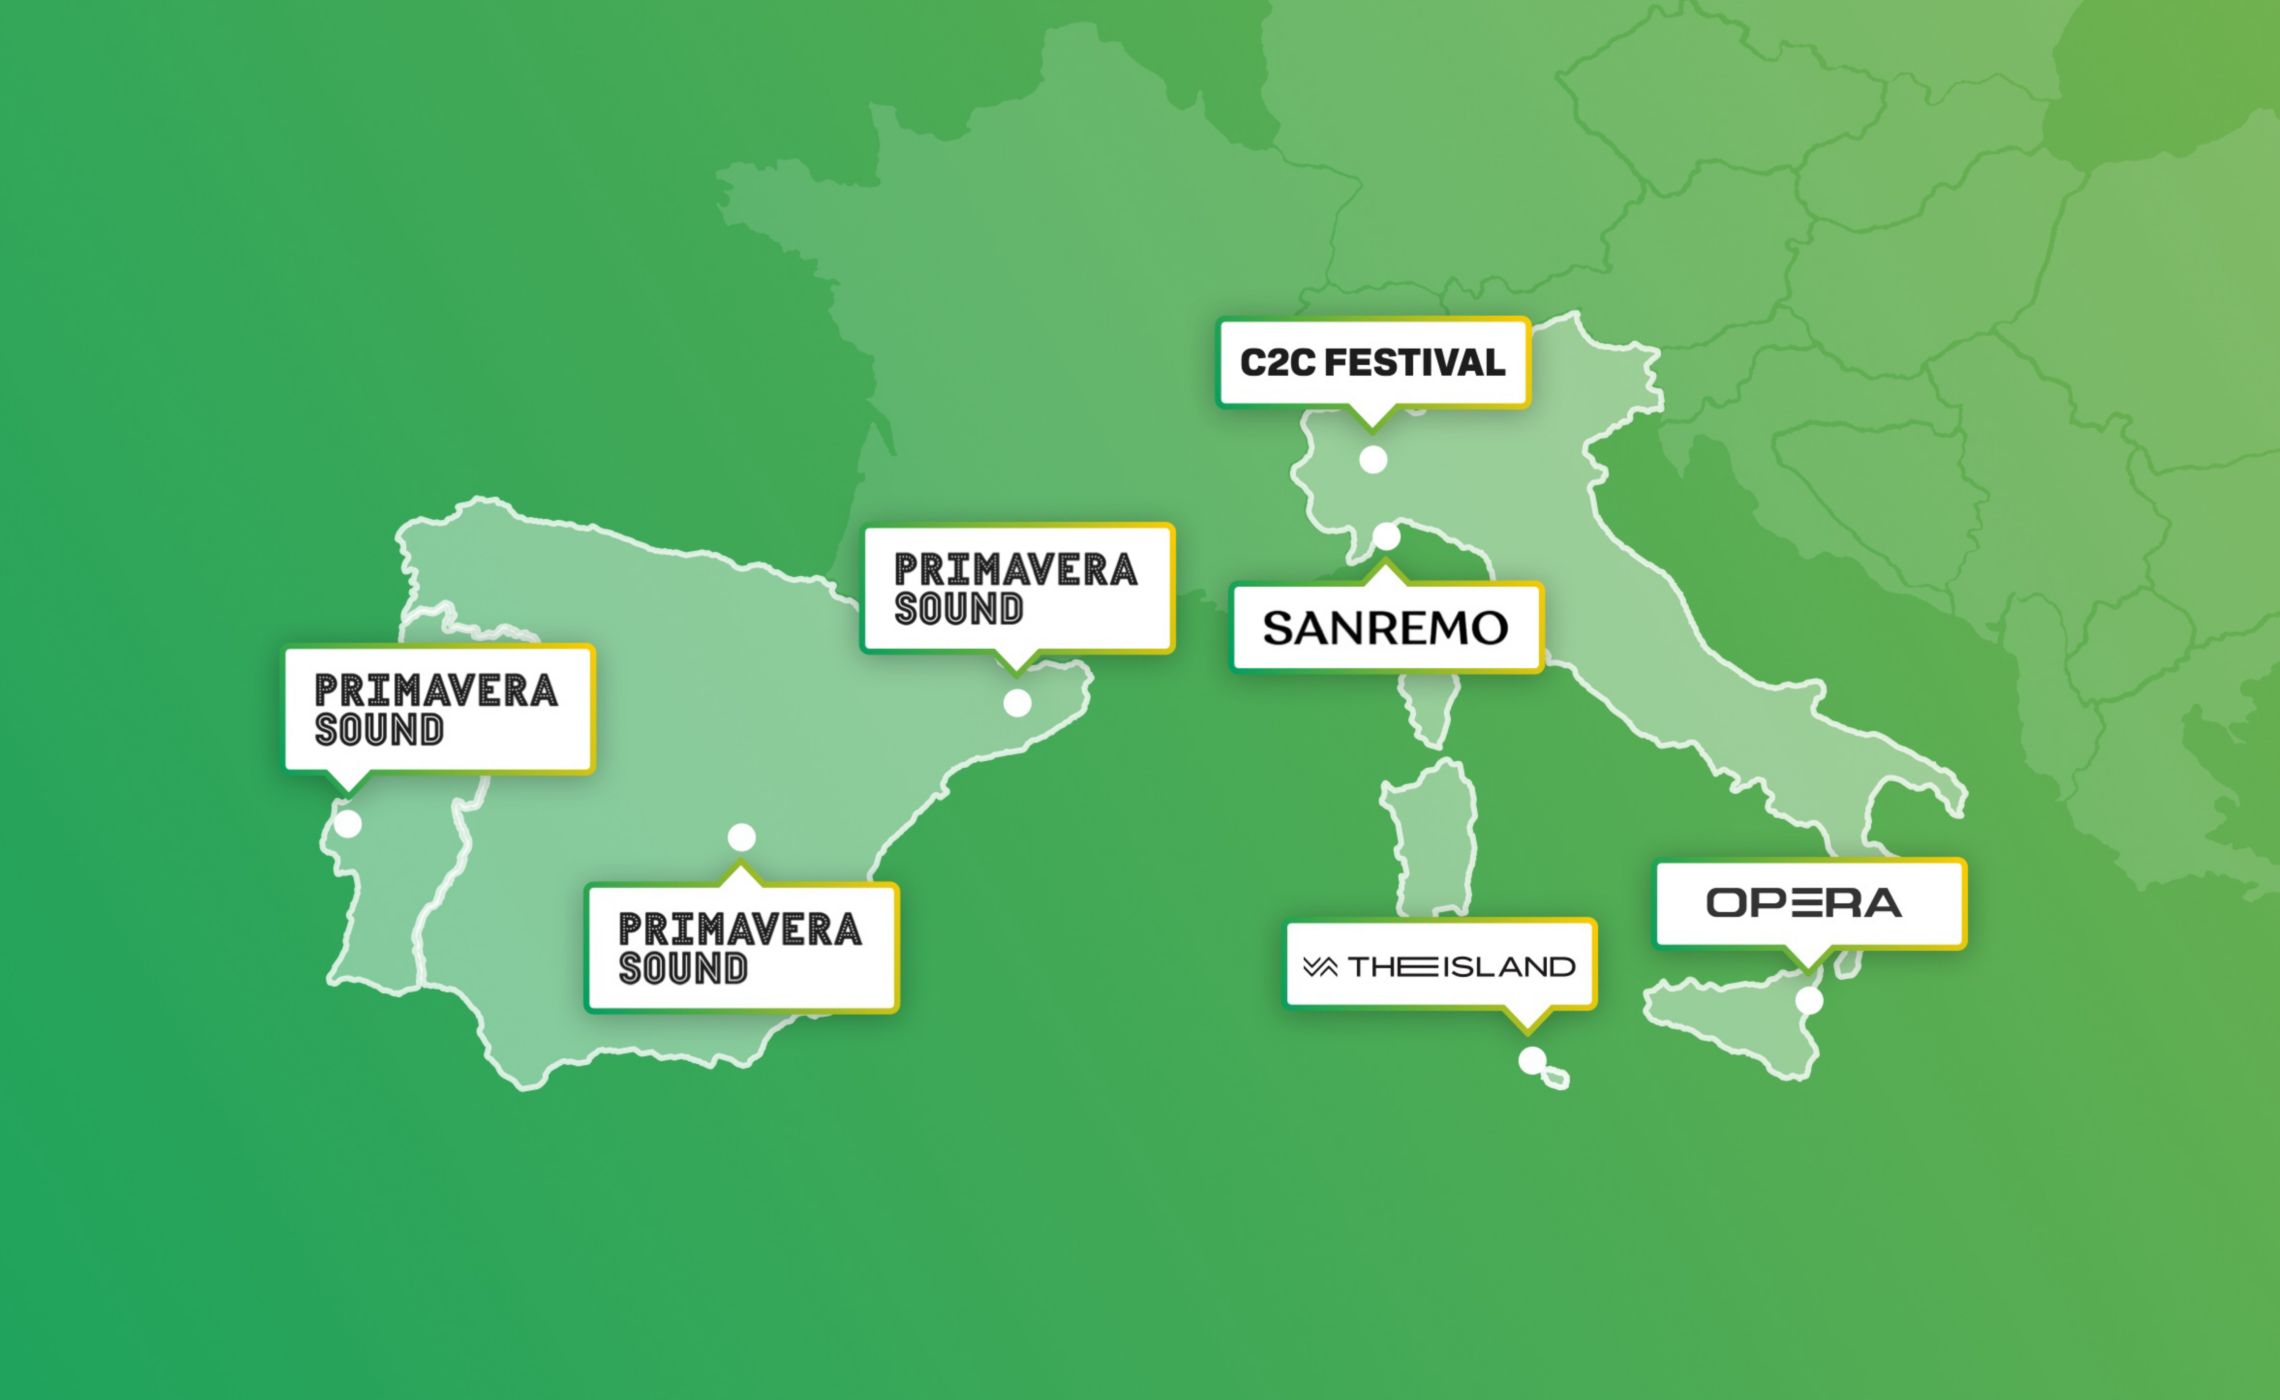 A map of the events in which Plenitude will participate as a sponsor, each venue has indicated which event it is hosting.